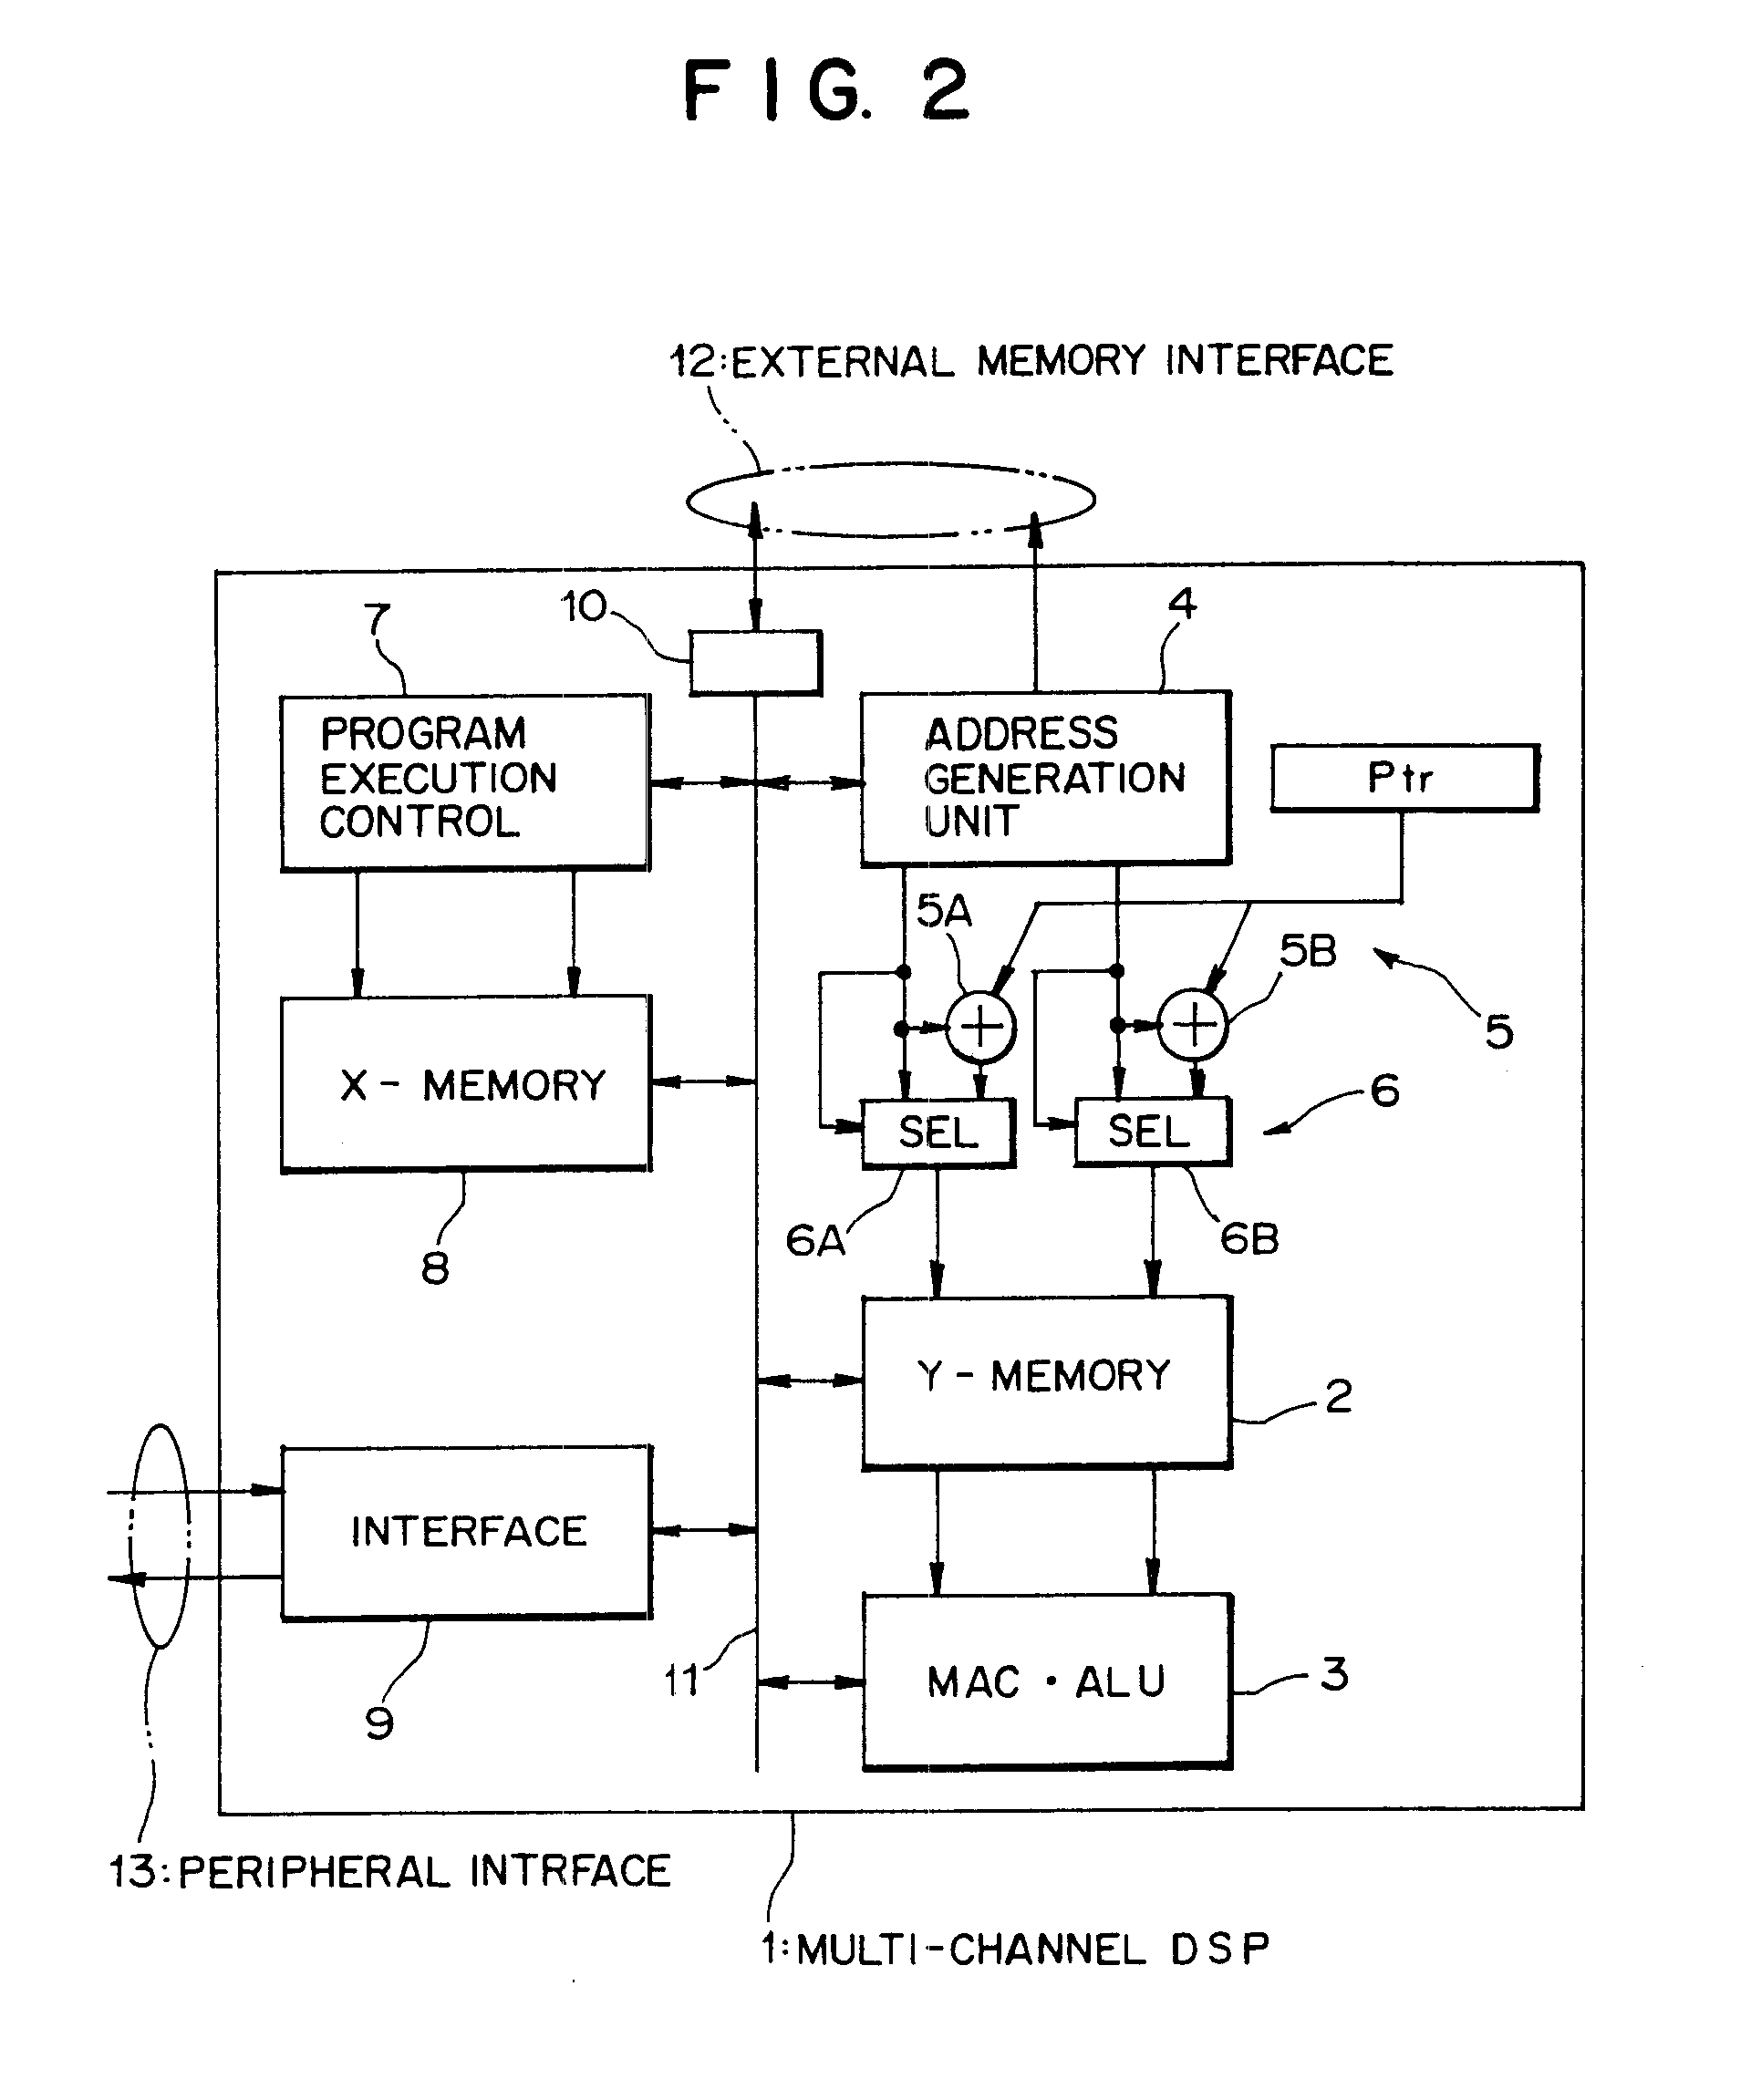 Memory management apparatus in a multi-channel signal processor